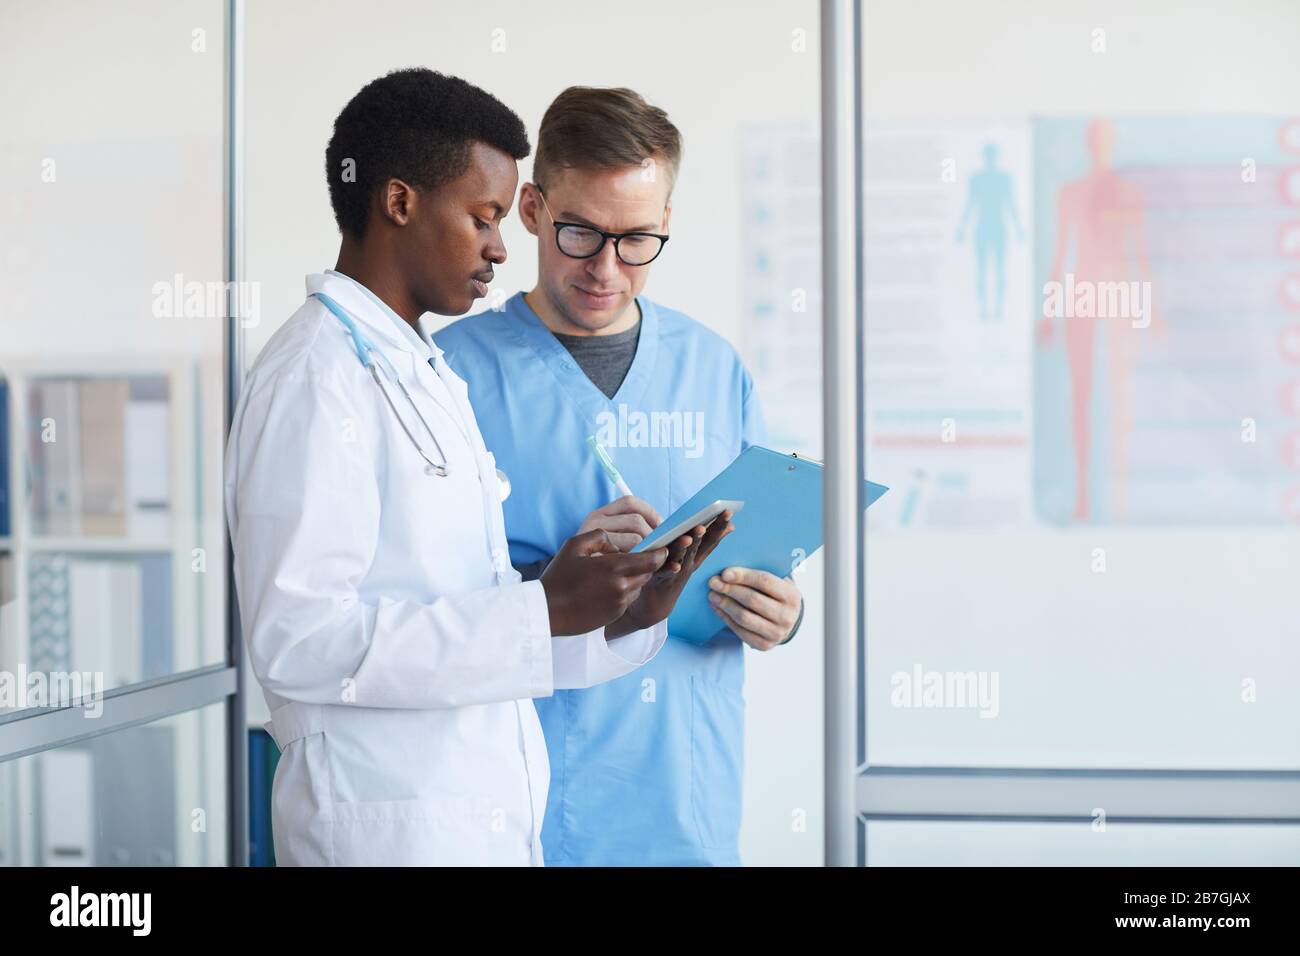 Waist up portrait of young African-American doctor talking to supervisor in medical office interior, copy space Stock Photo